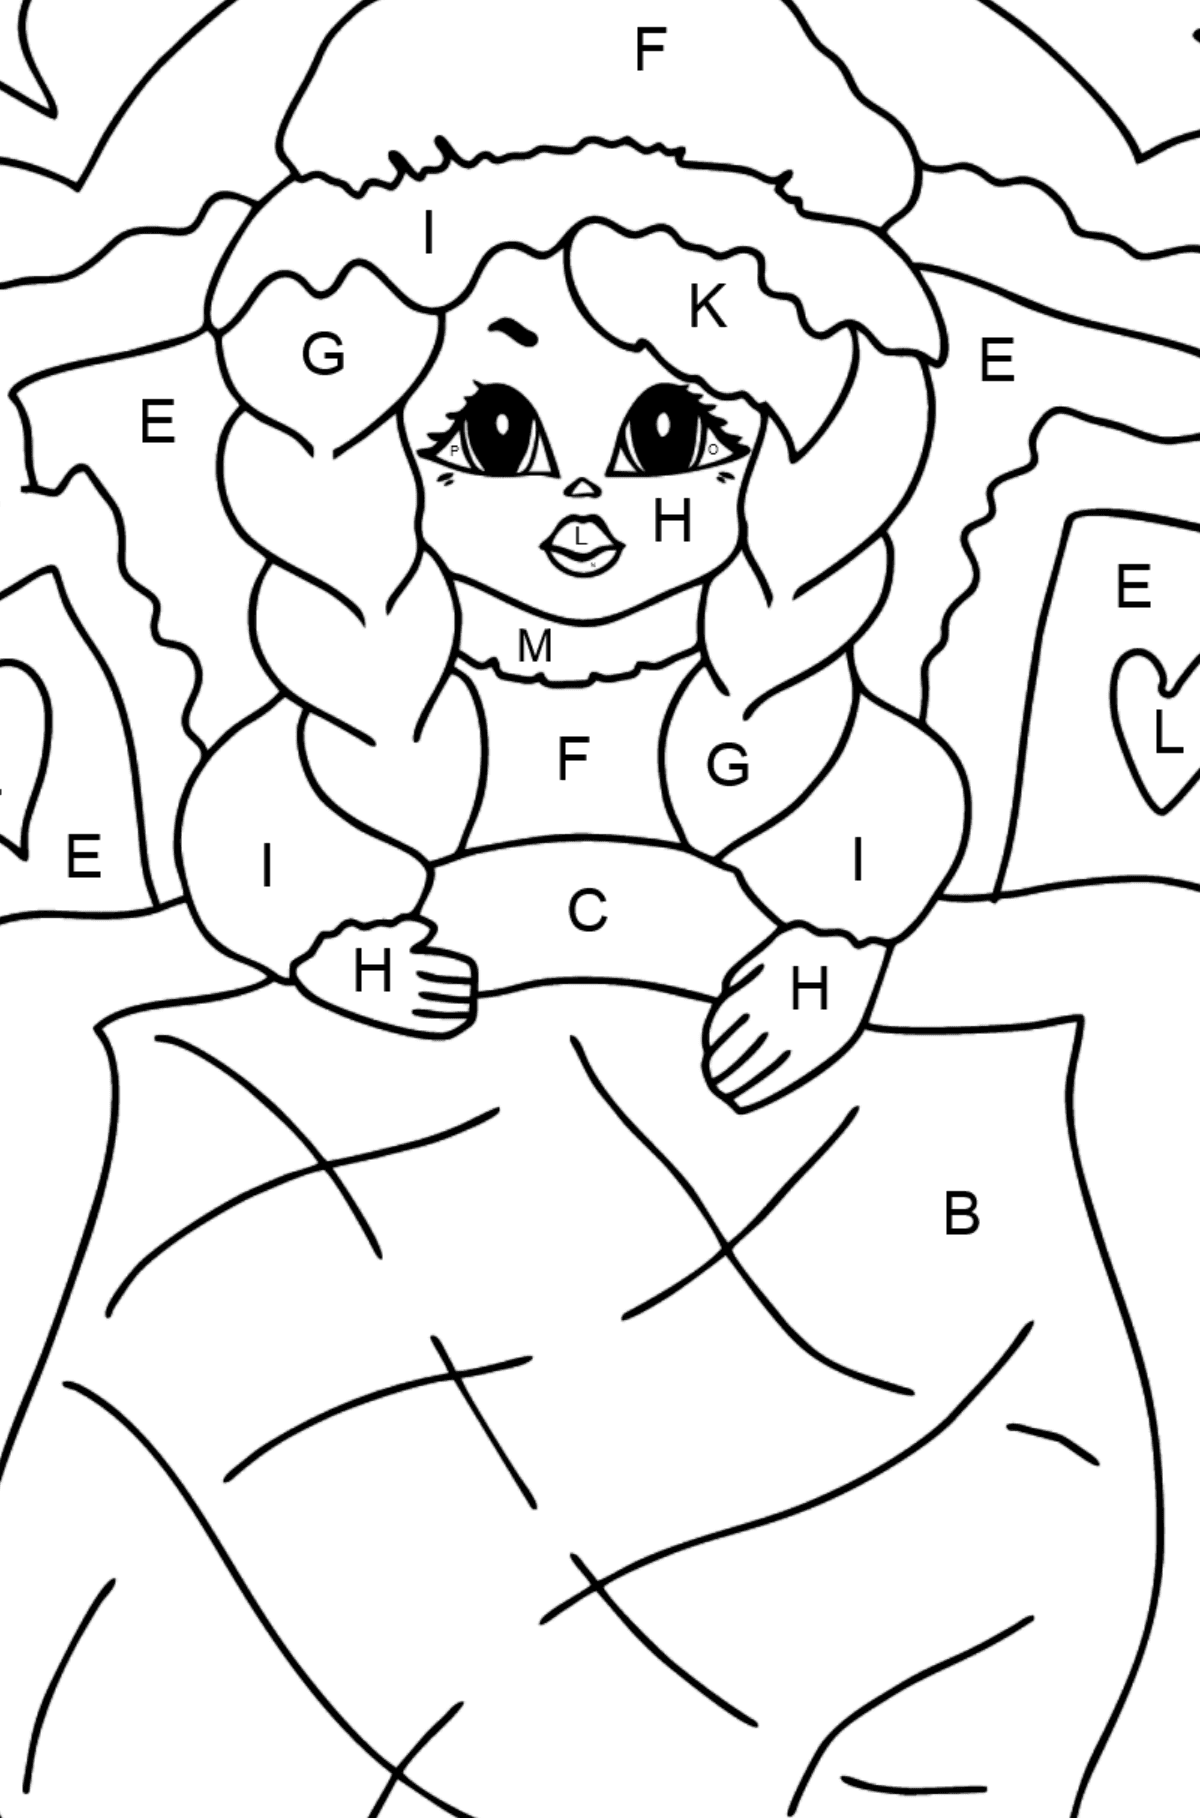 Coloring Page - A Princess in Bed - Coloring by Letters for Kids